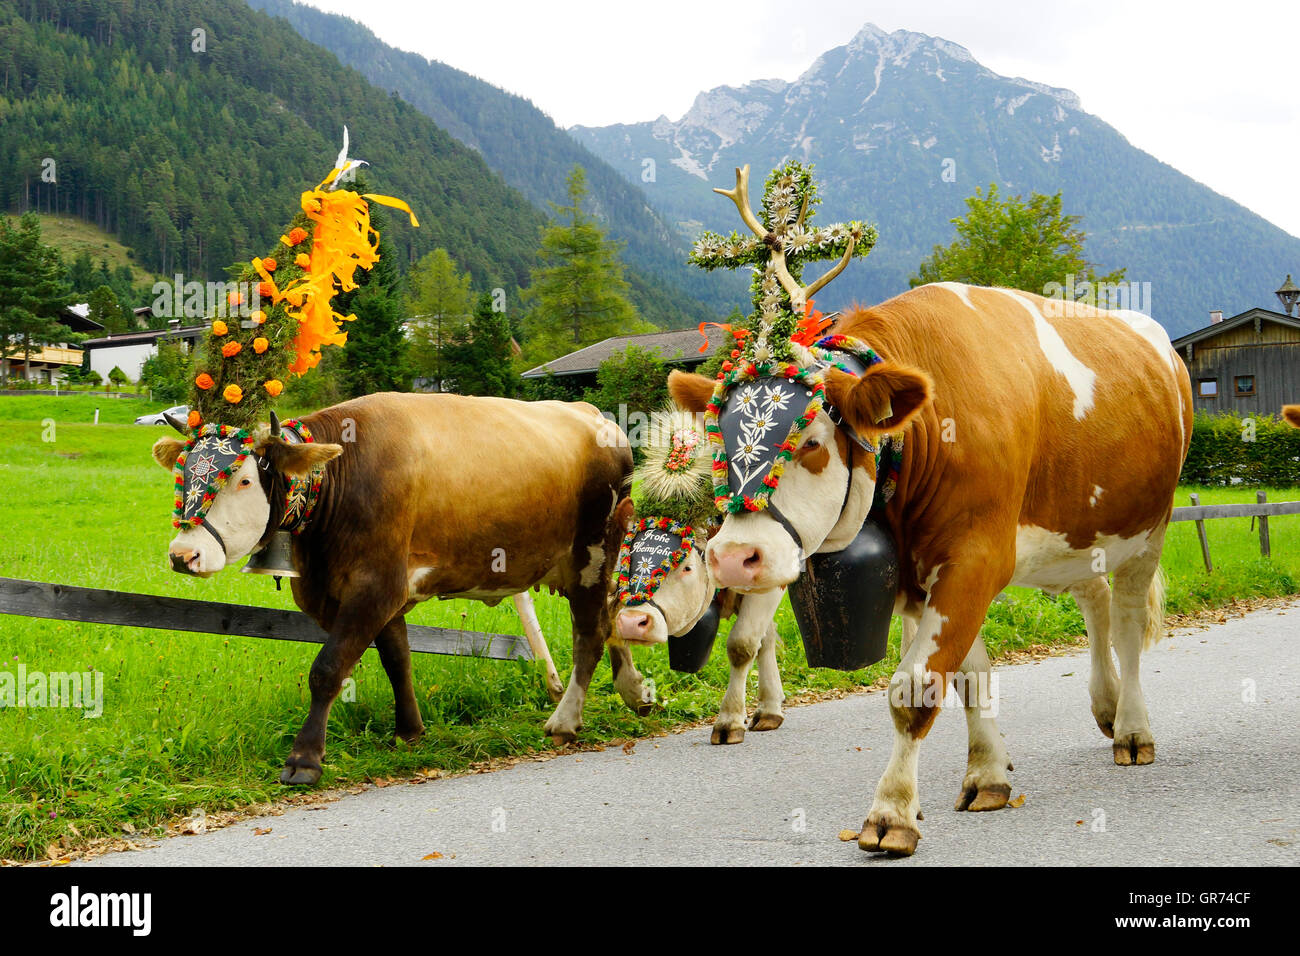 Cows In The Mountains Stock Photo